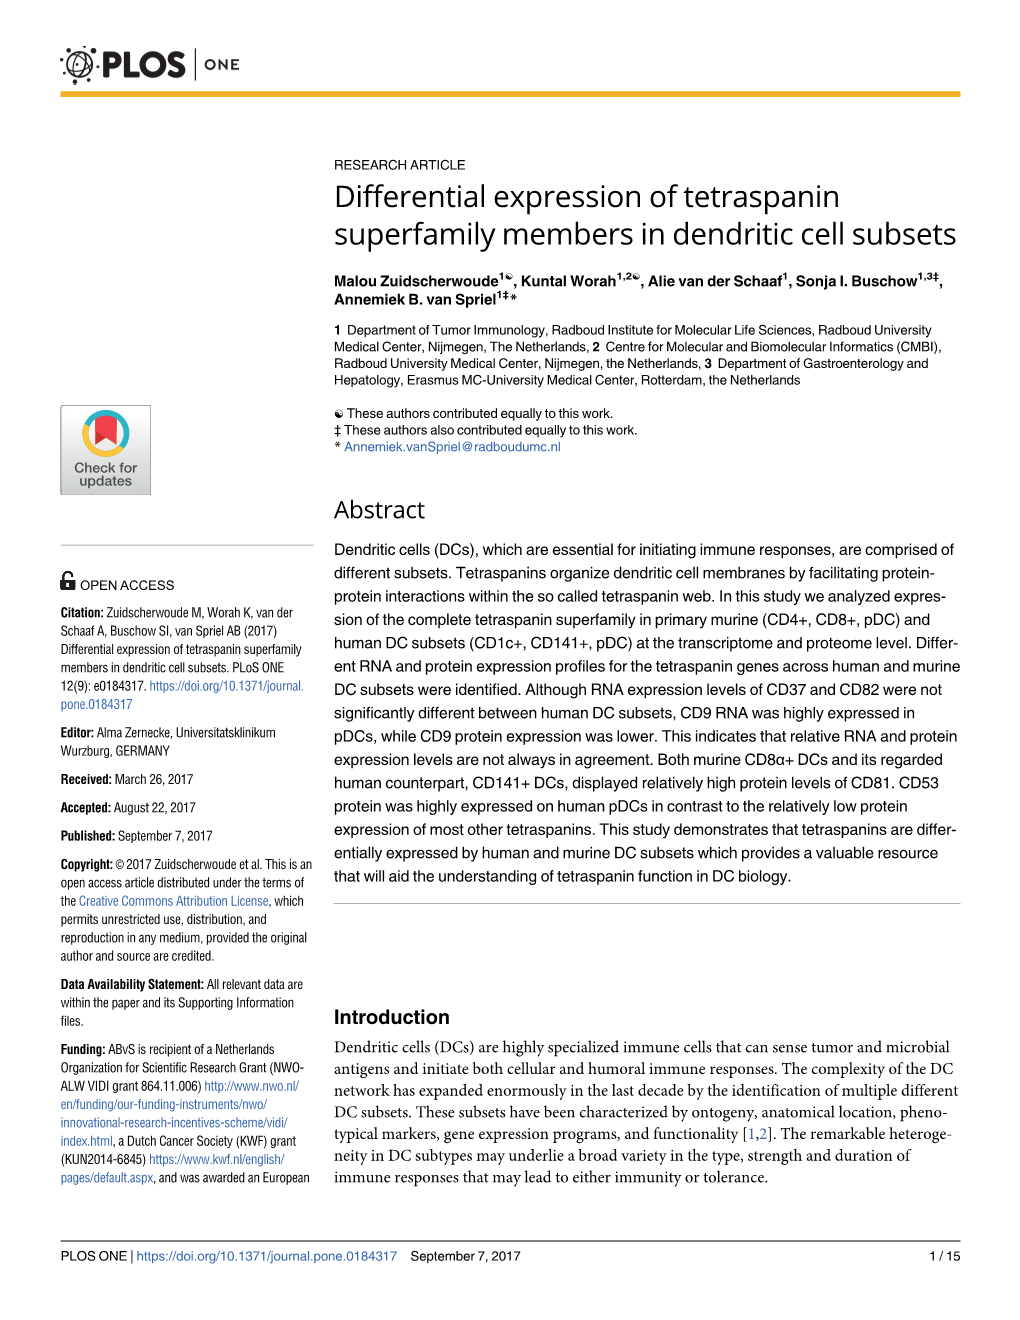 Differential Expression of Tetraspanin Superfamily Members in Dendritic Cell Subsets